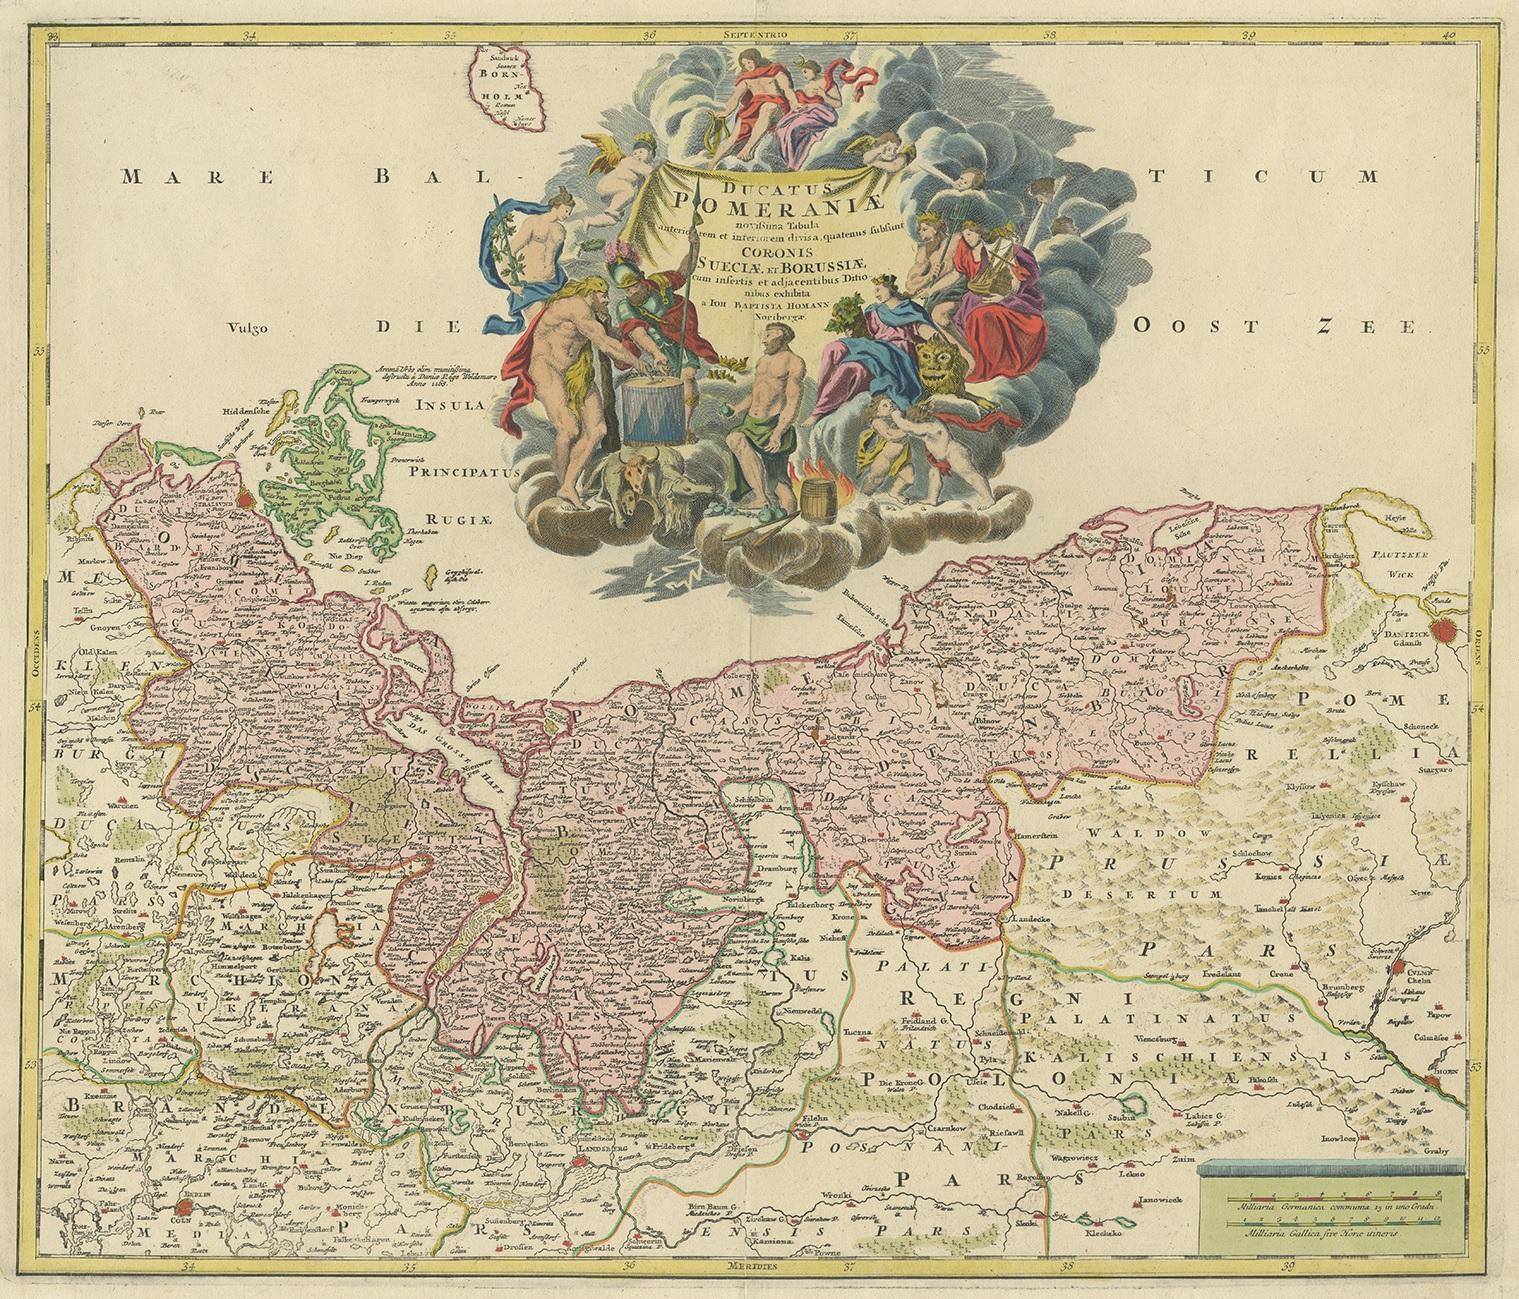 Antique map titled 'Ducatus Pomeraniae (..)'. Regional map of the Baltic, extending from Stralsund and Rugia in the west to Dantzig and Culman on the Vistula in the east. Large cartouche, one of the most ornate allegorical cartouches to appear on a